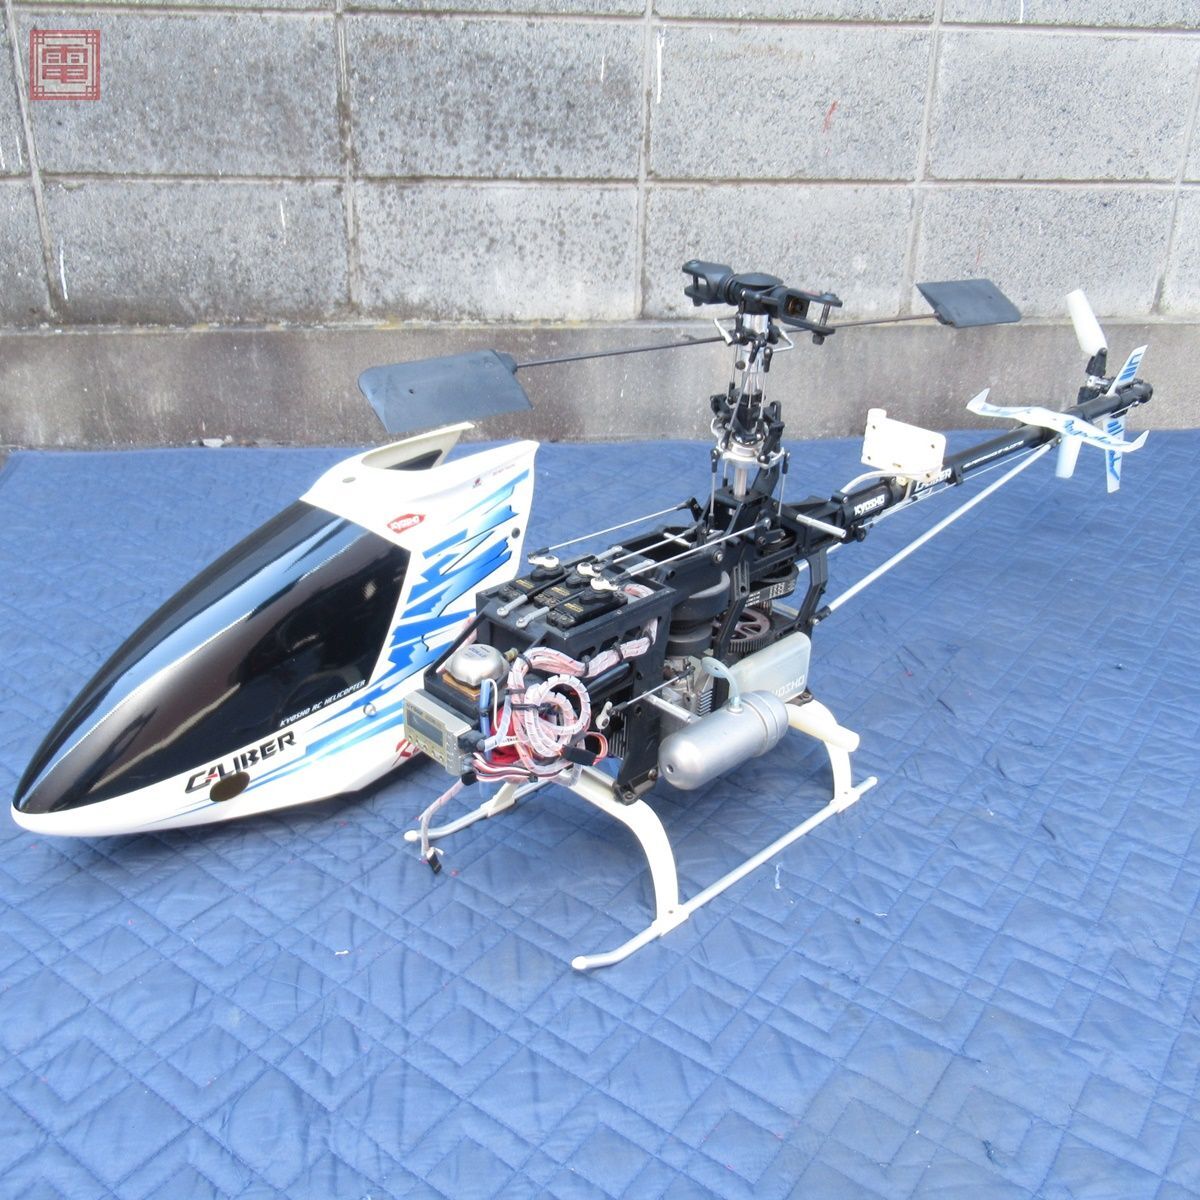  Kyosho kyali bar 30 engine / receiver / servo / Gyro installing total length approximately 115cm RC radio controller helicopter kyosyo CALIBER30 operation not yet verification present condition goods [SI